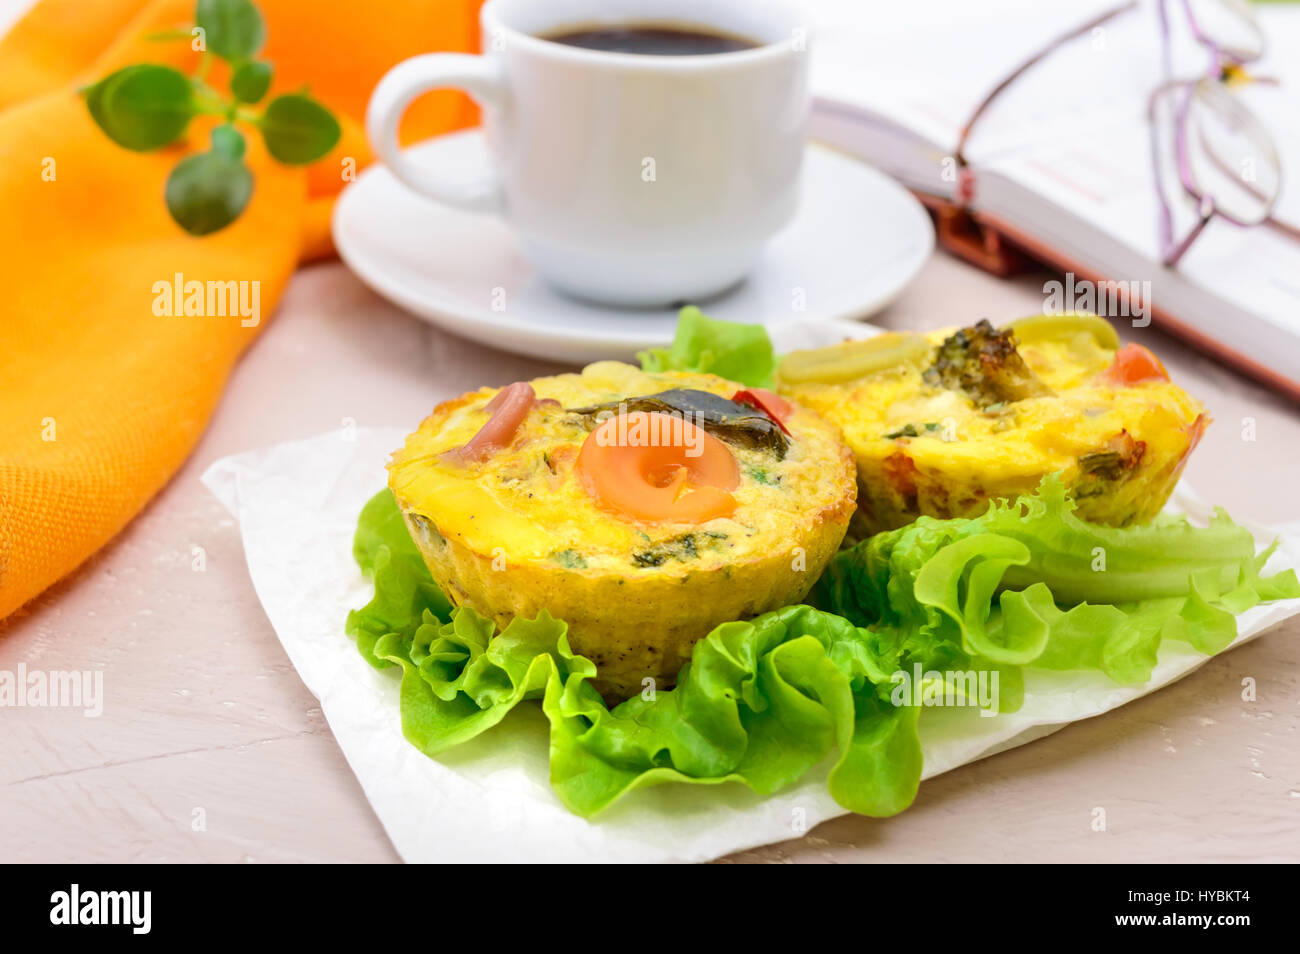 Omelette with colored pasta, mushrooms, vegetables and herbs, cooked in the form of mafins and a cup of espresso. Breakfast. Stock Photo